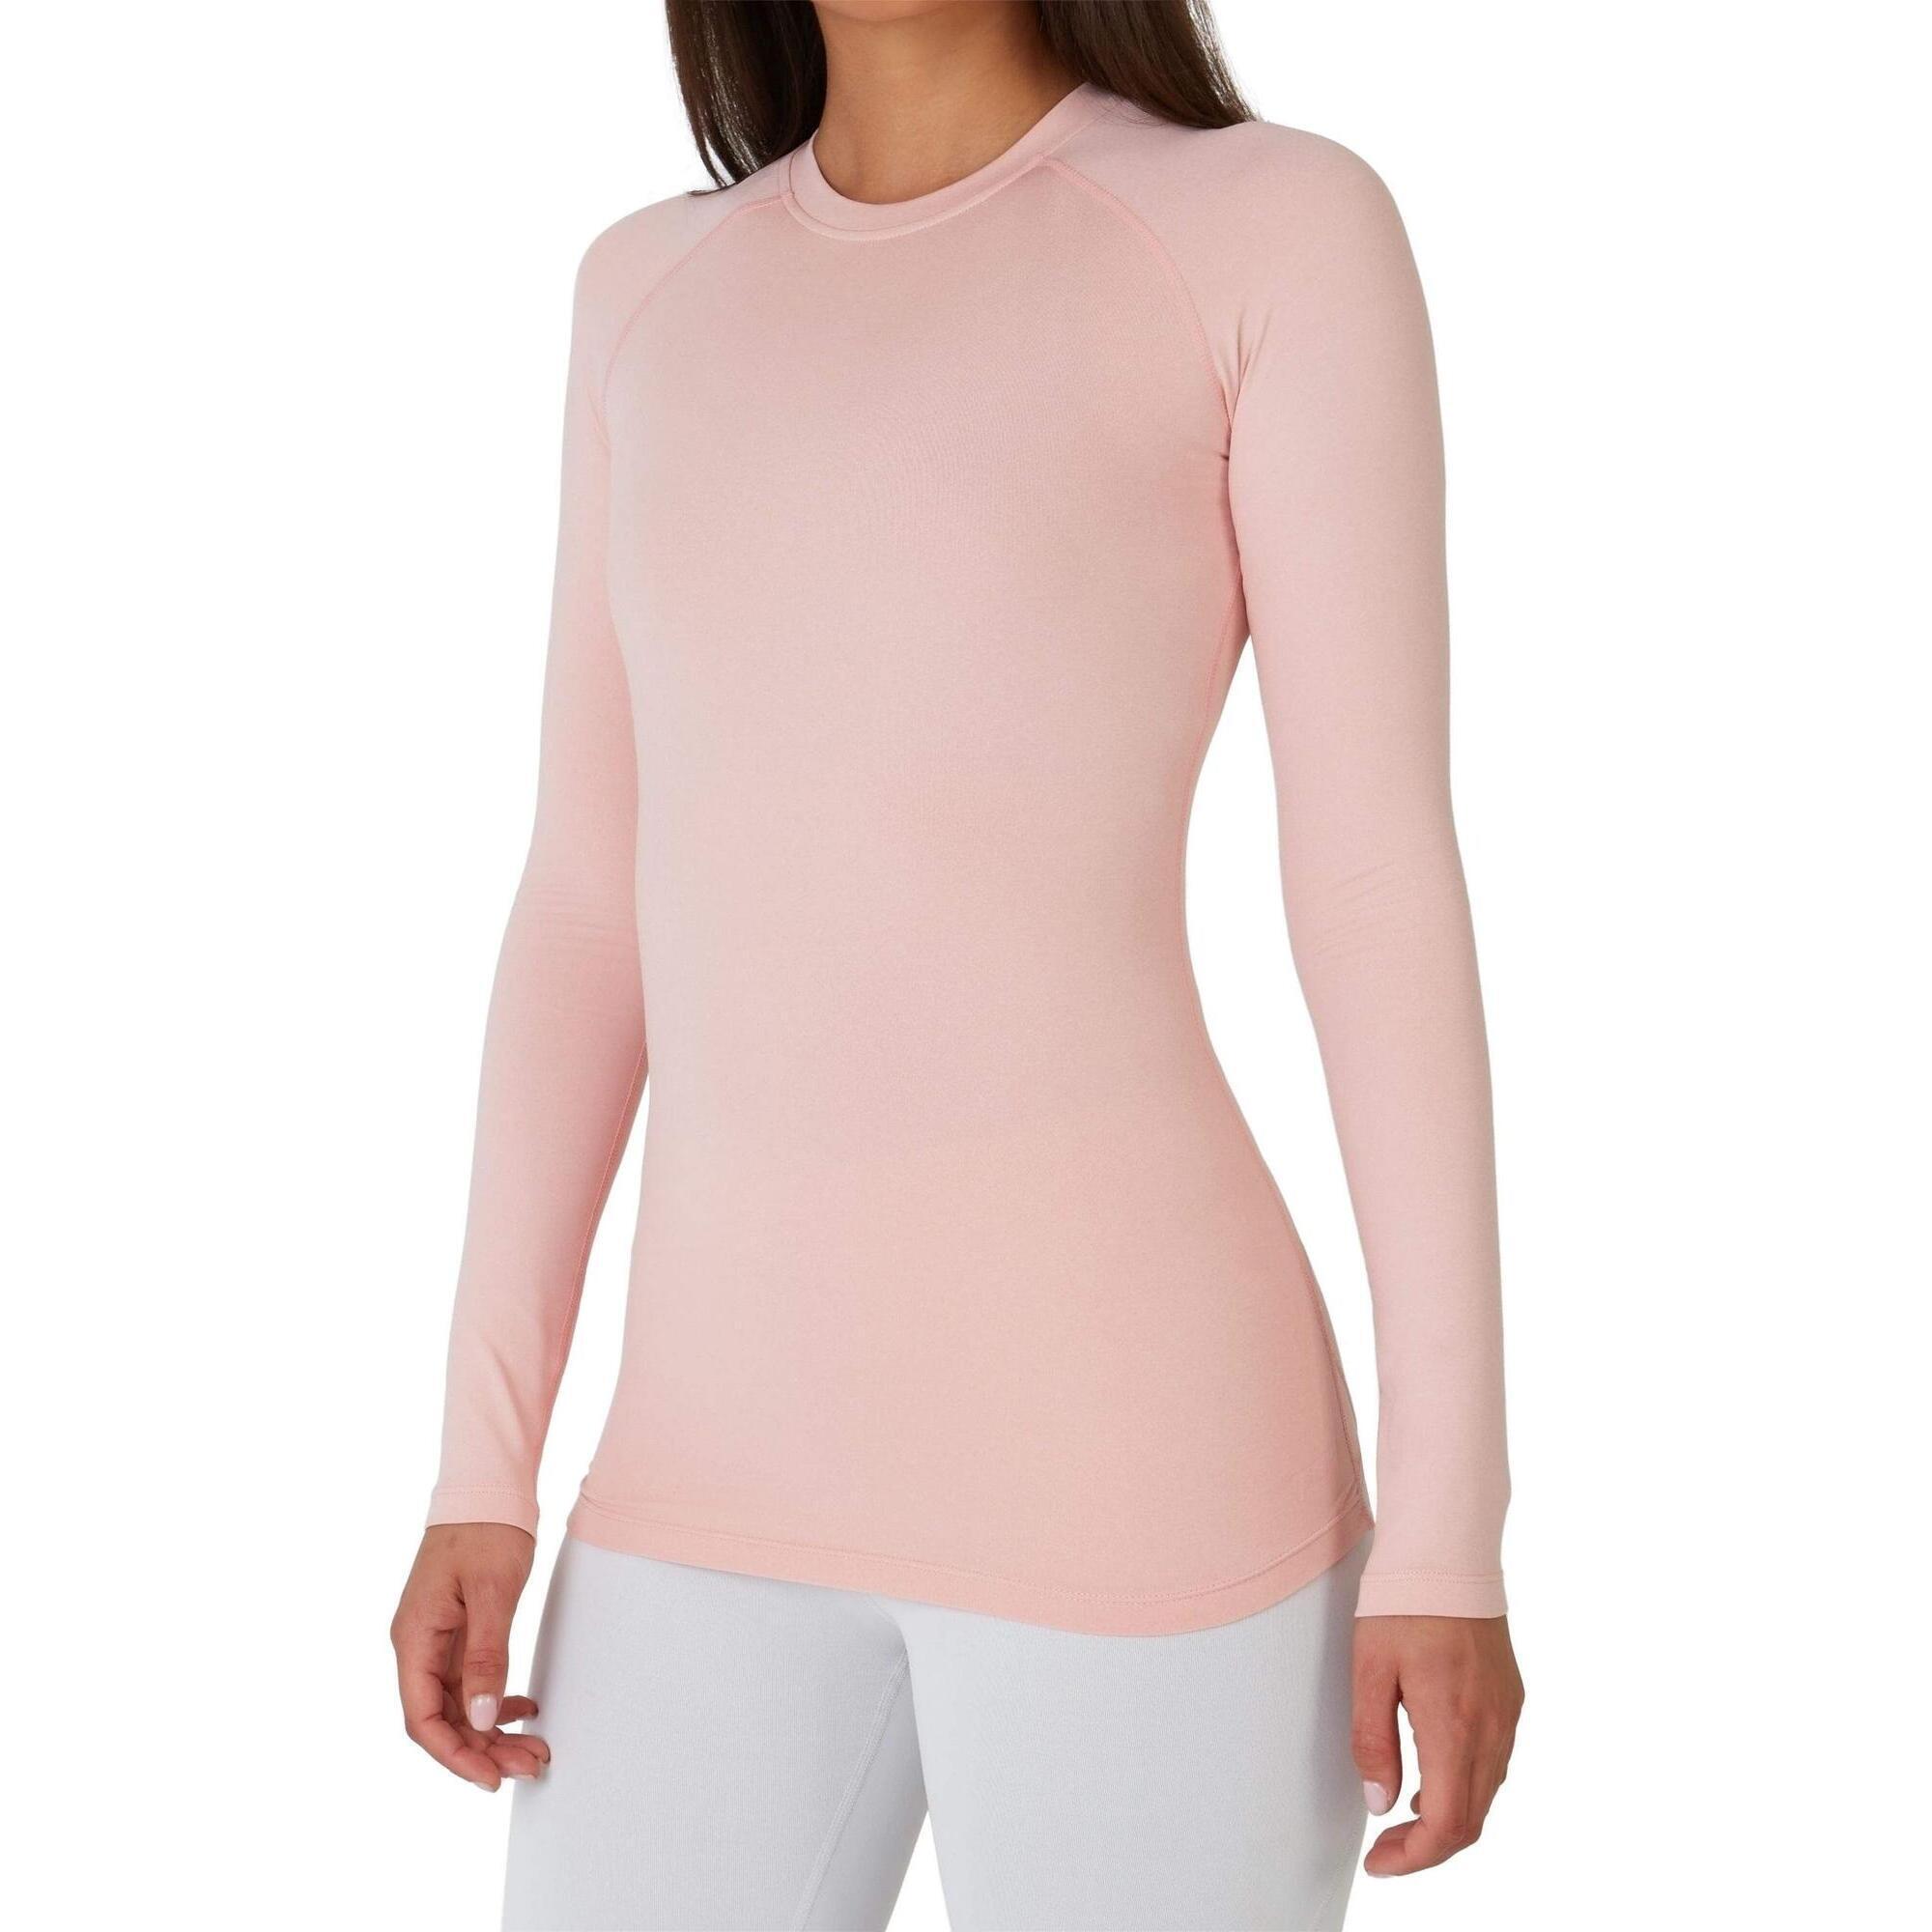 TCA Women's Super Thermal Base Layer Top - Pink Silver